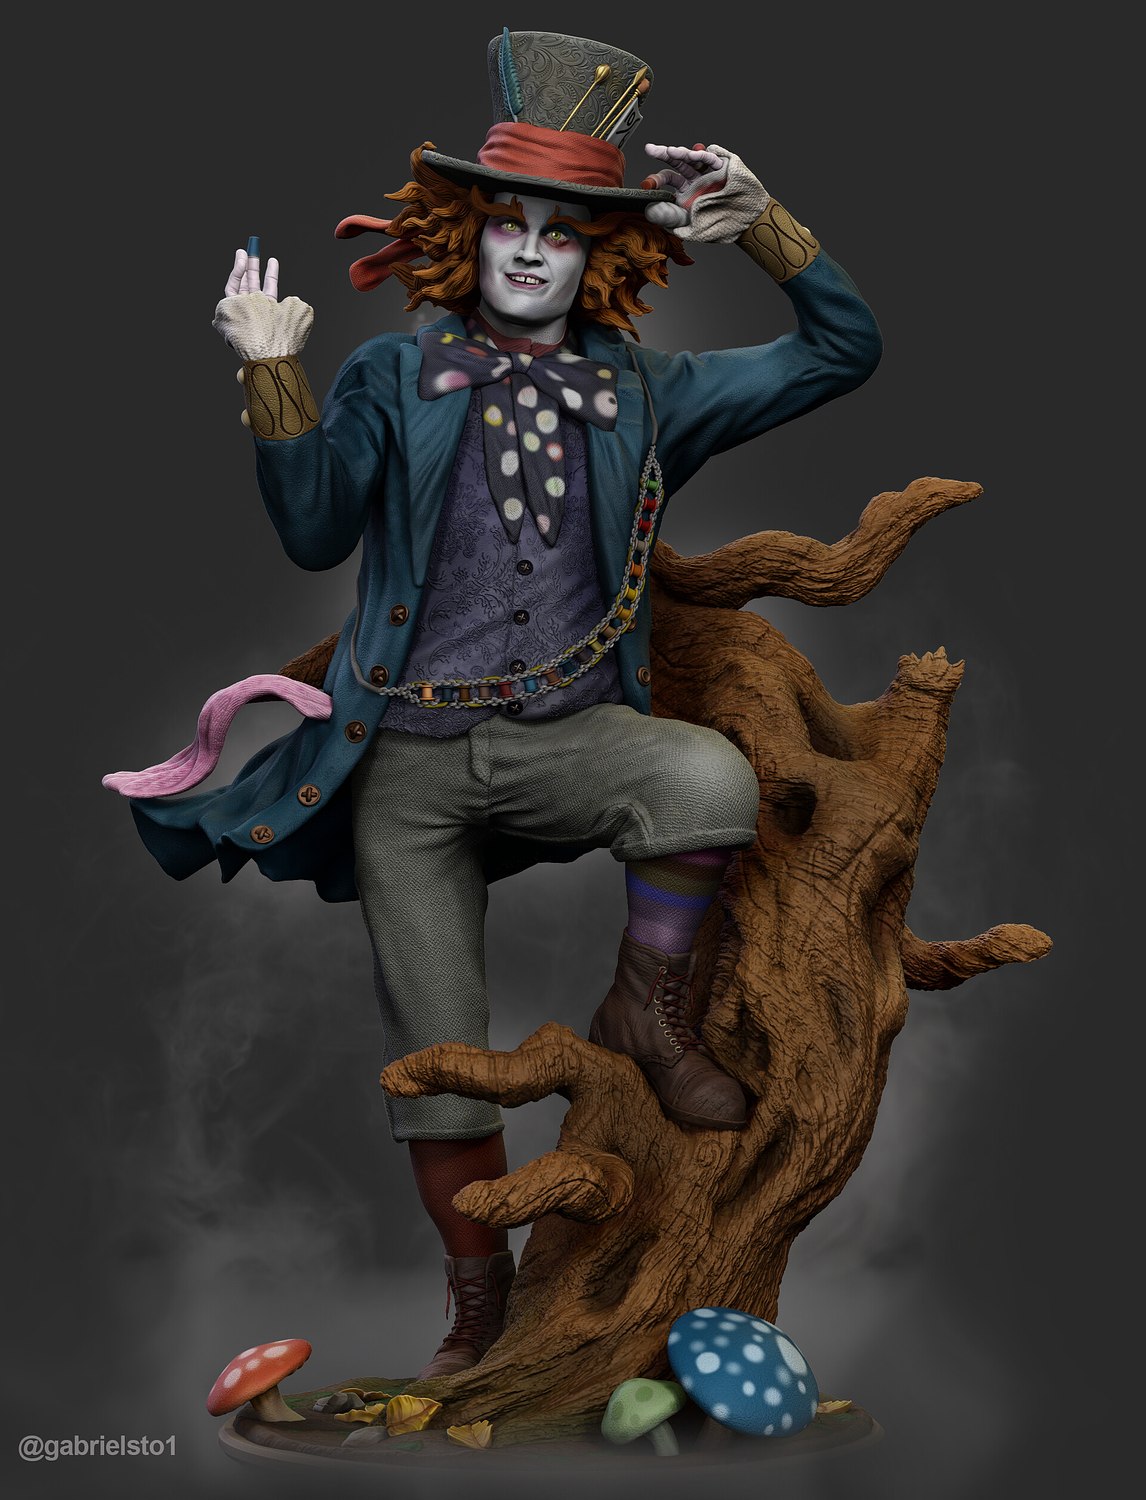 The Mad Hatter From Alice in Wonderland